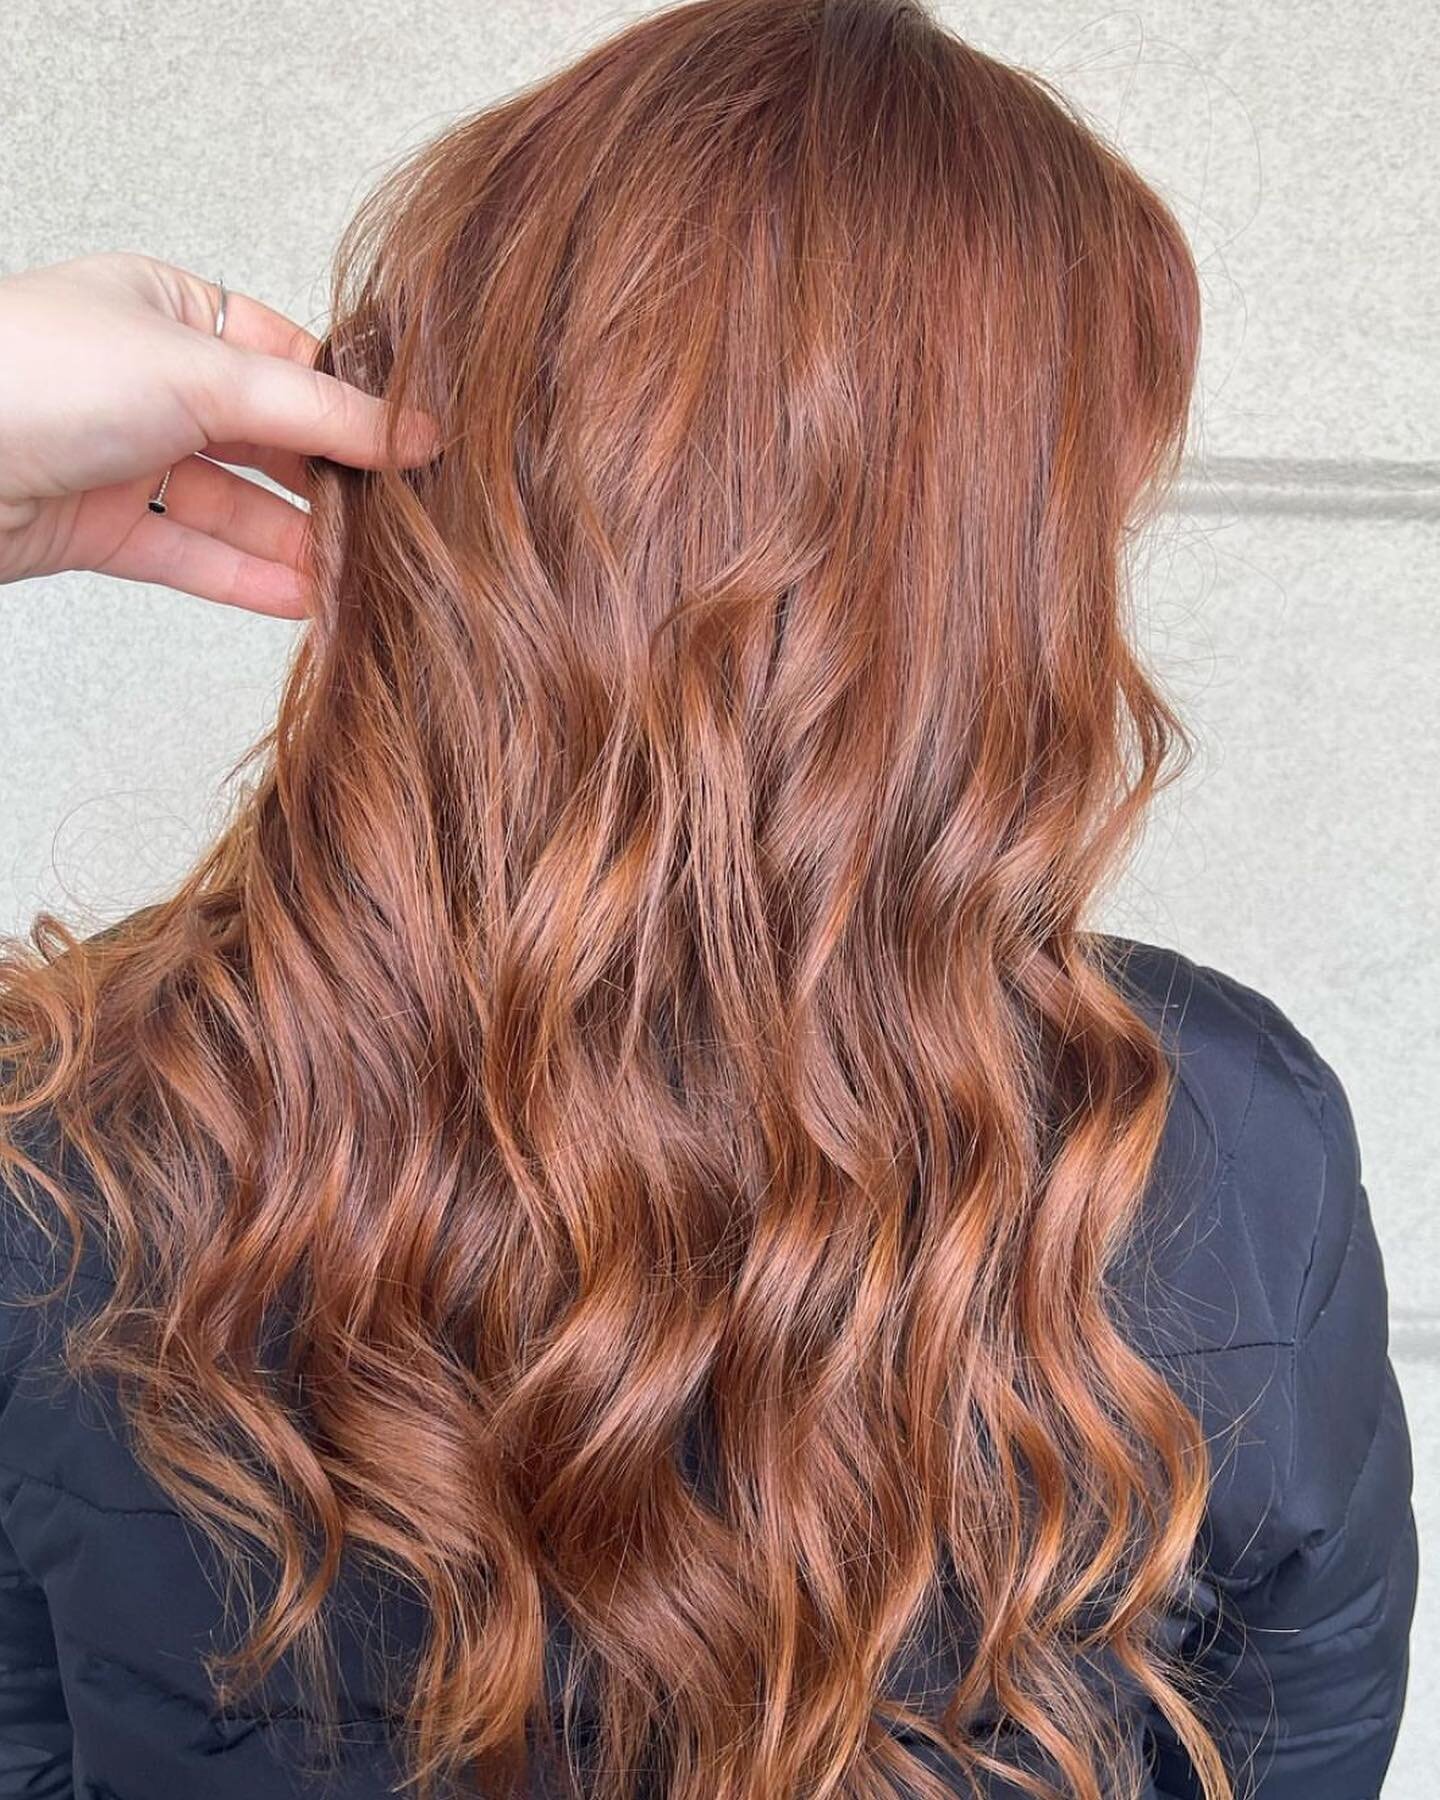 Beautiful color by @get.scissored 

She is accepting new clients 20% off for the month of February! For booking go to staturesalon.com